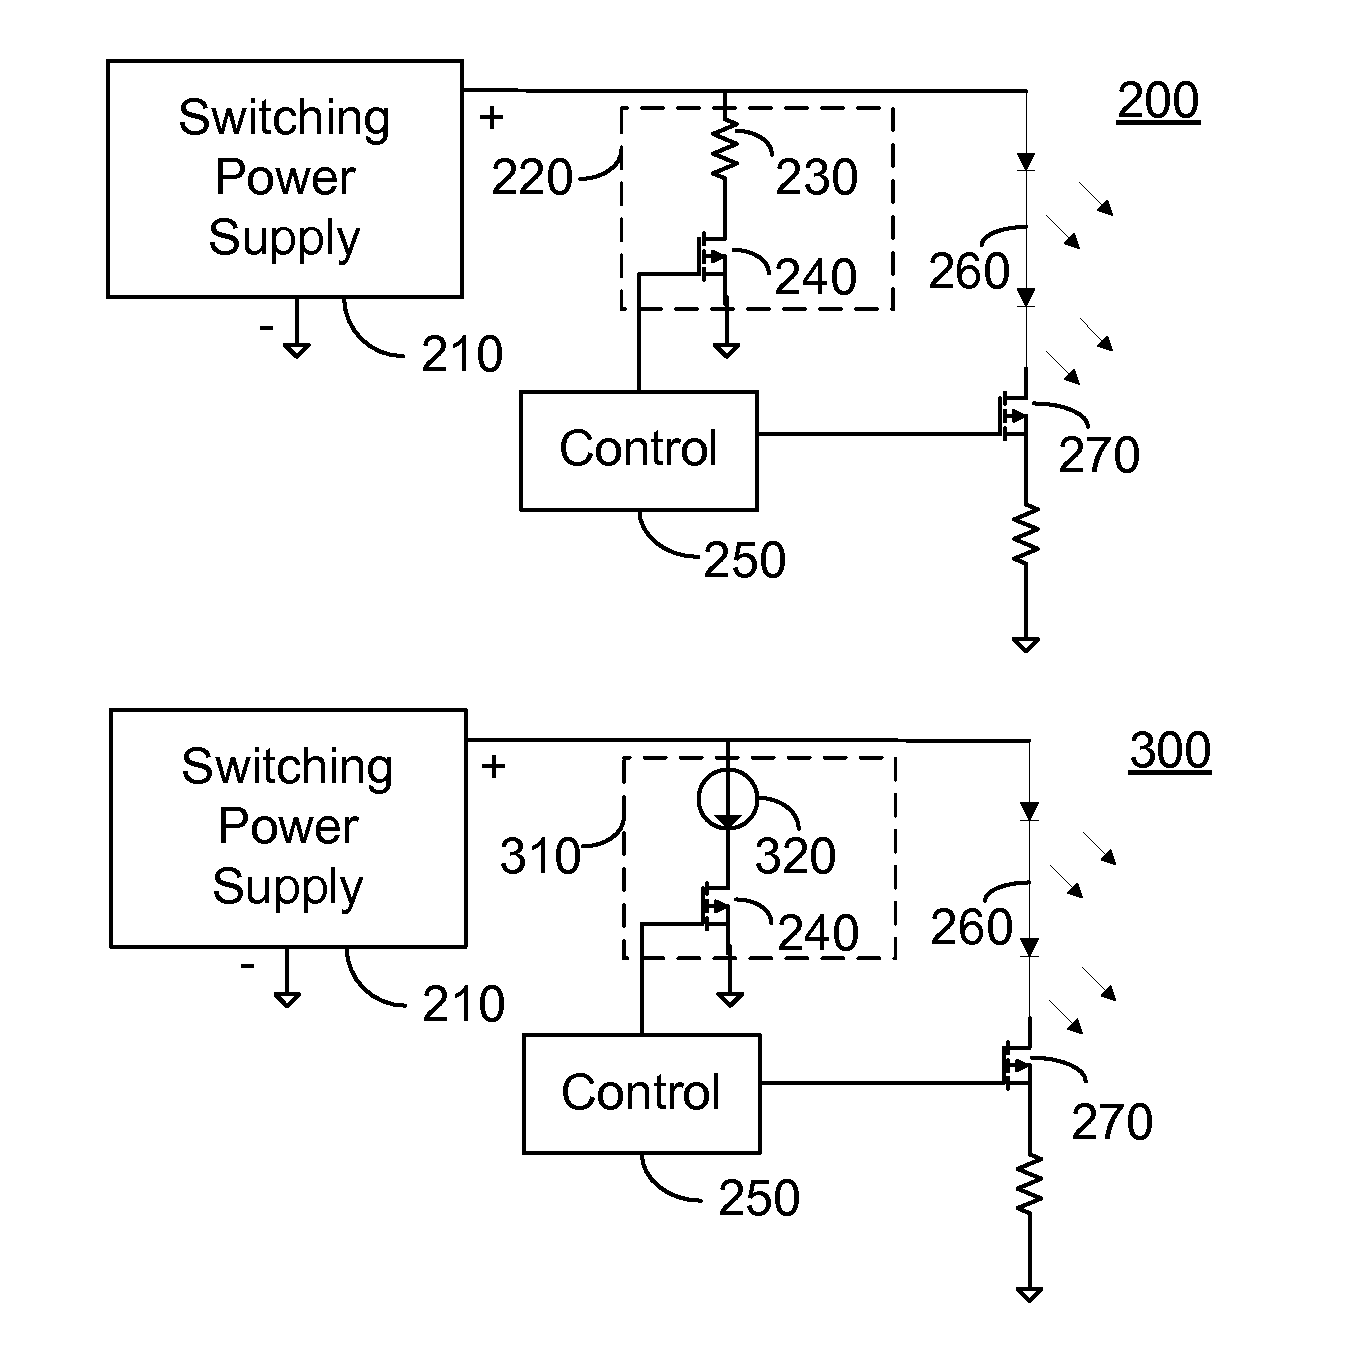 Controlled bleeder for power supply